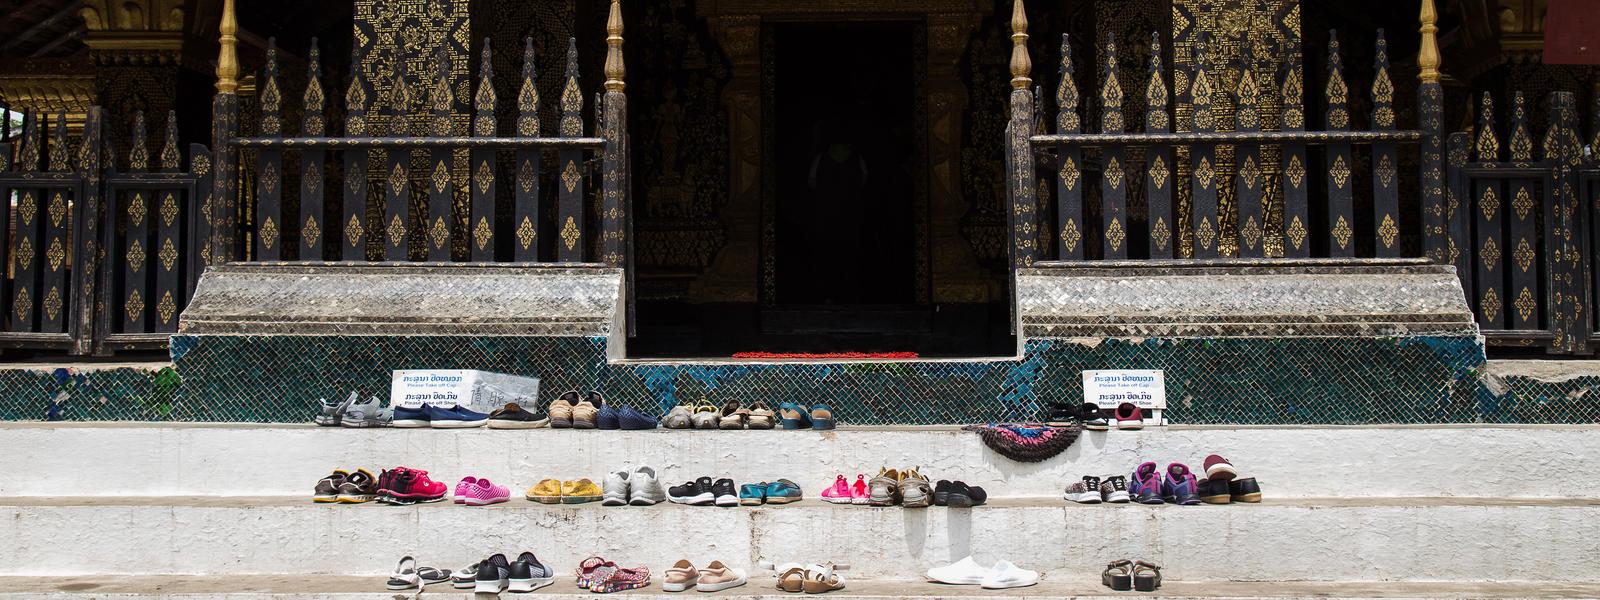 shoes at door of temple